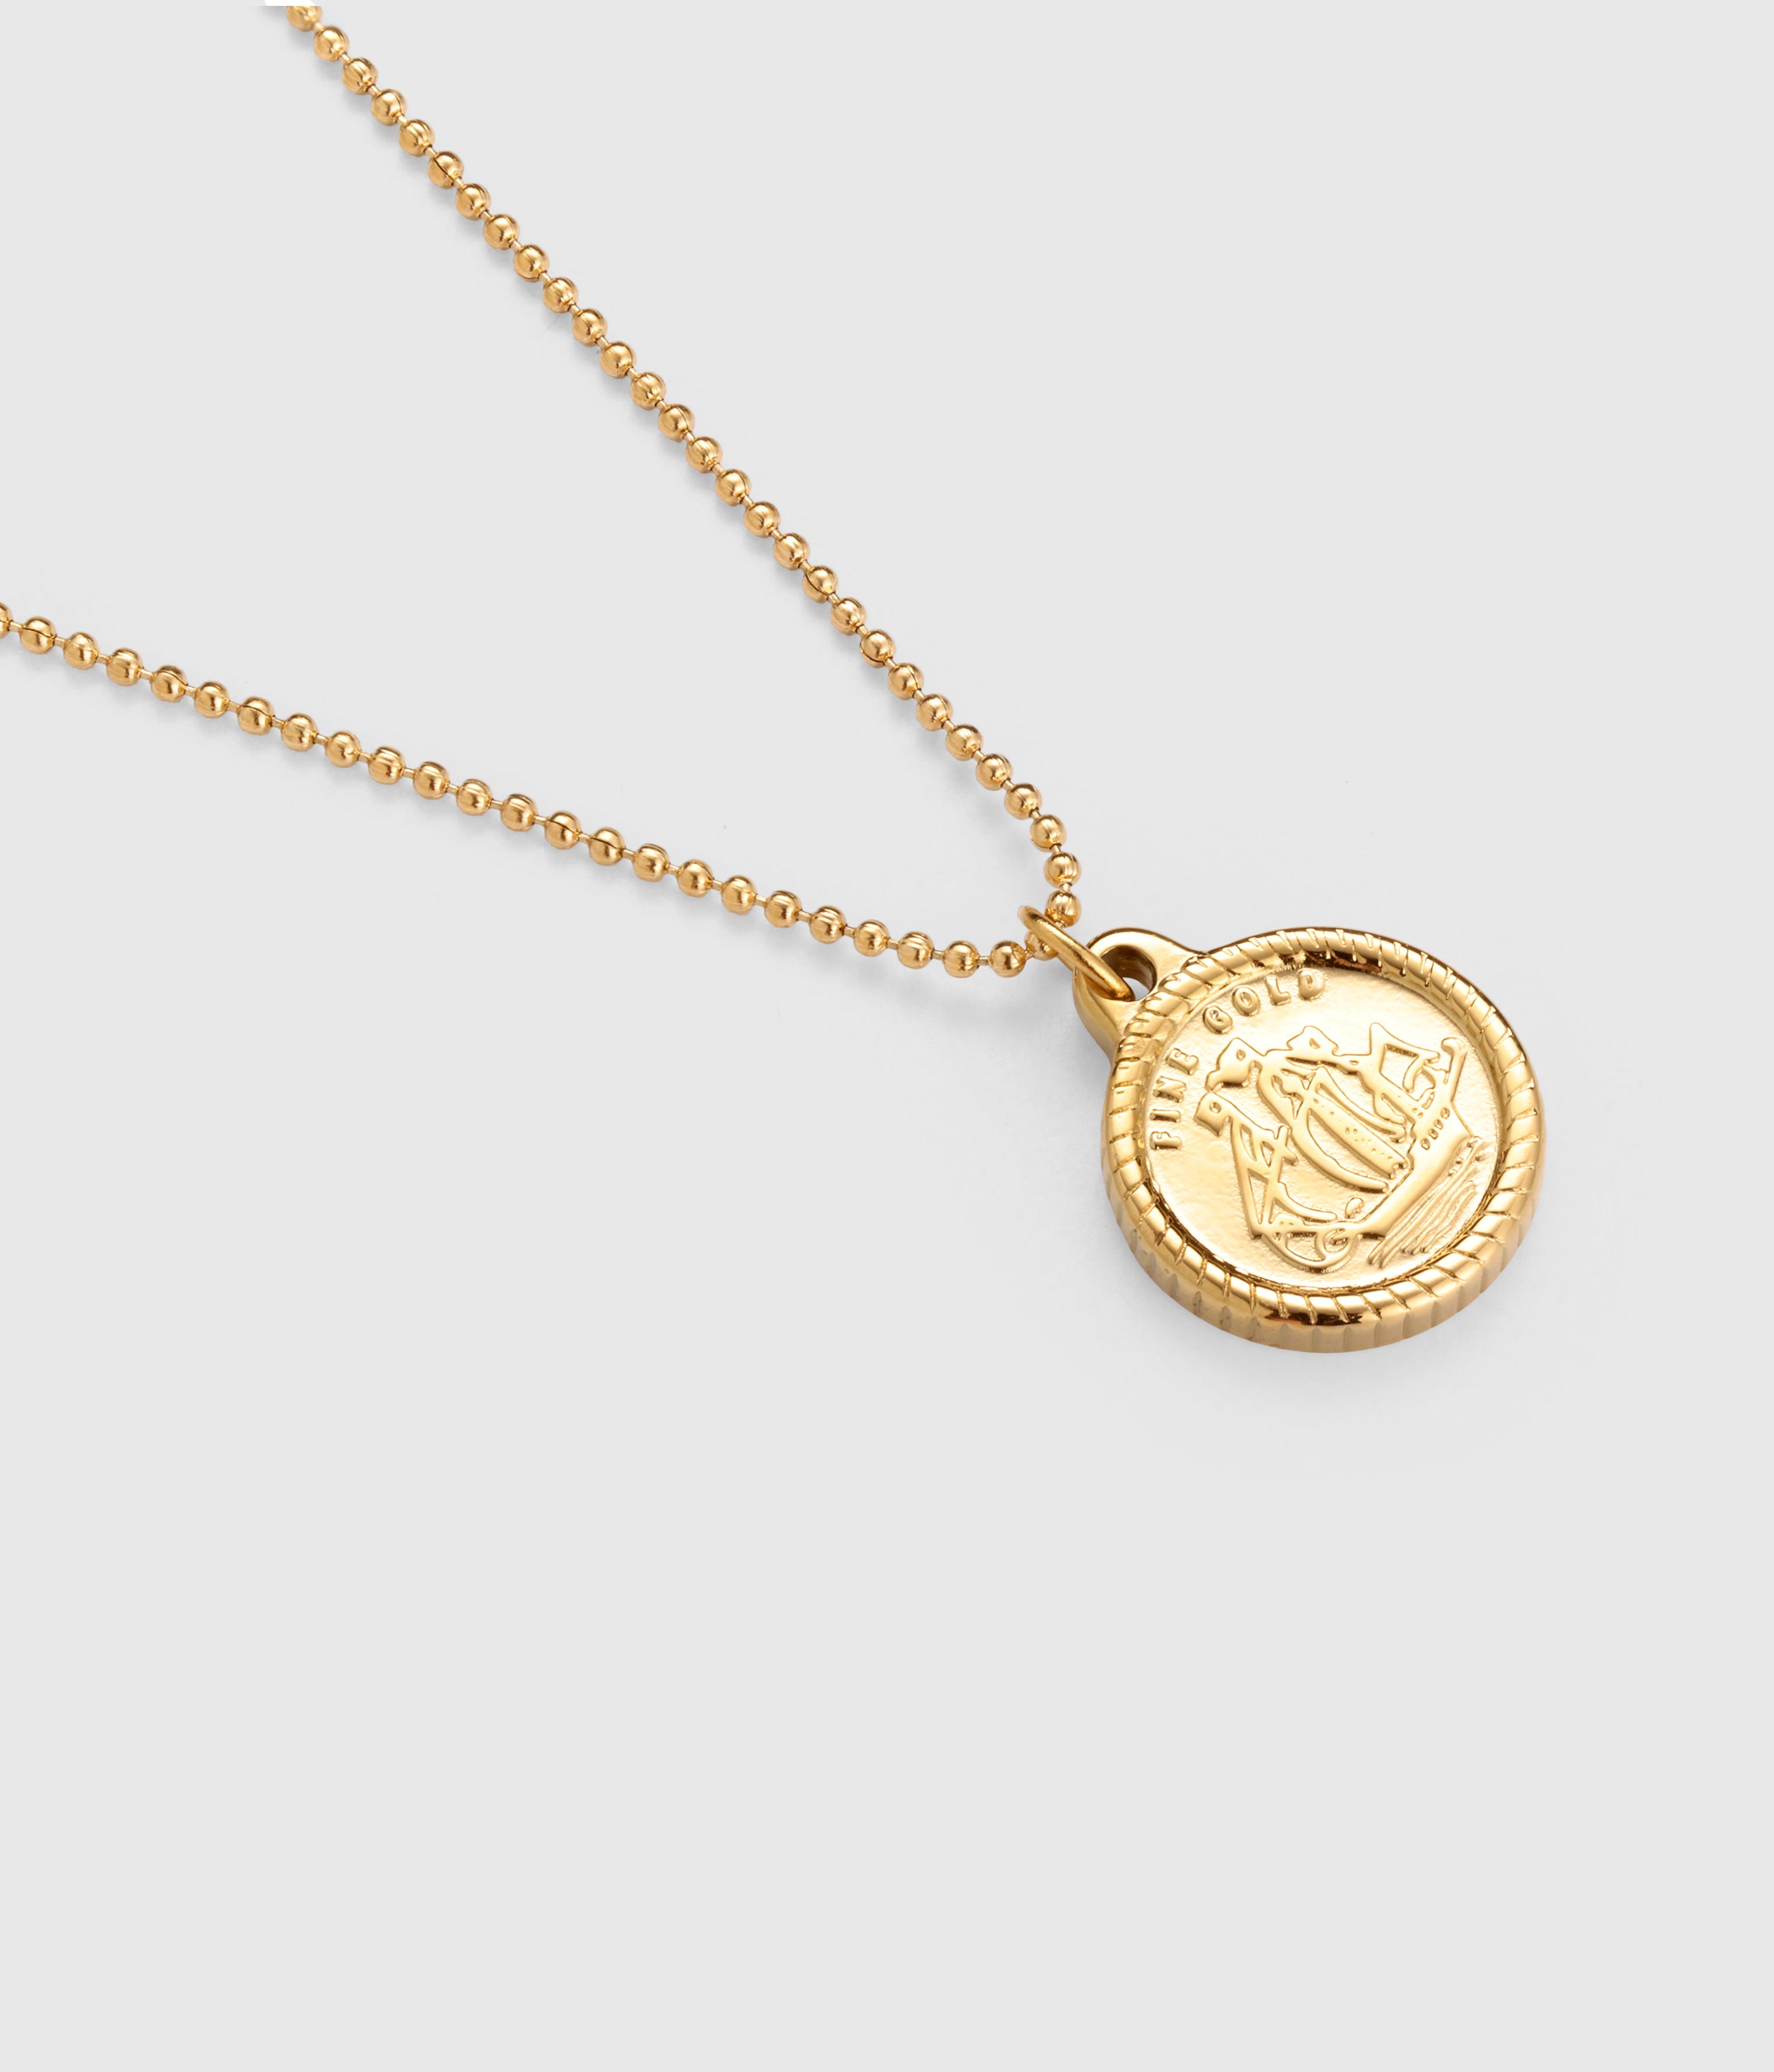 Antique Silver Tone Goddess Coin Pendant Necklace in 18K Gold Over Sterling  Silver - TALICH